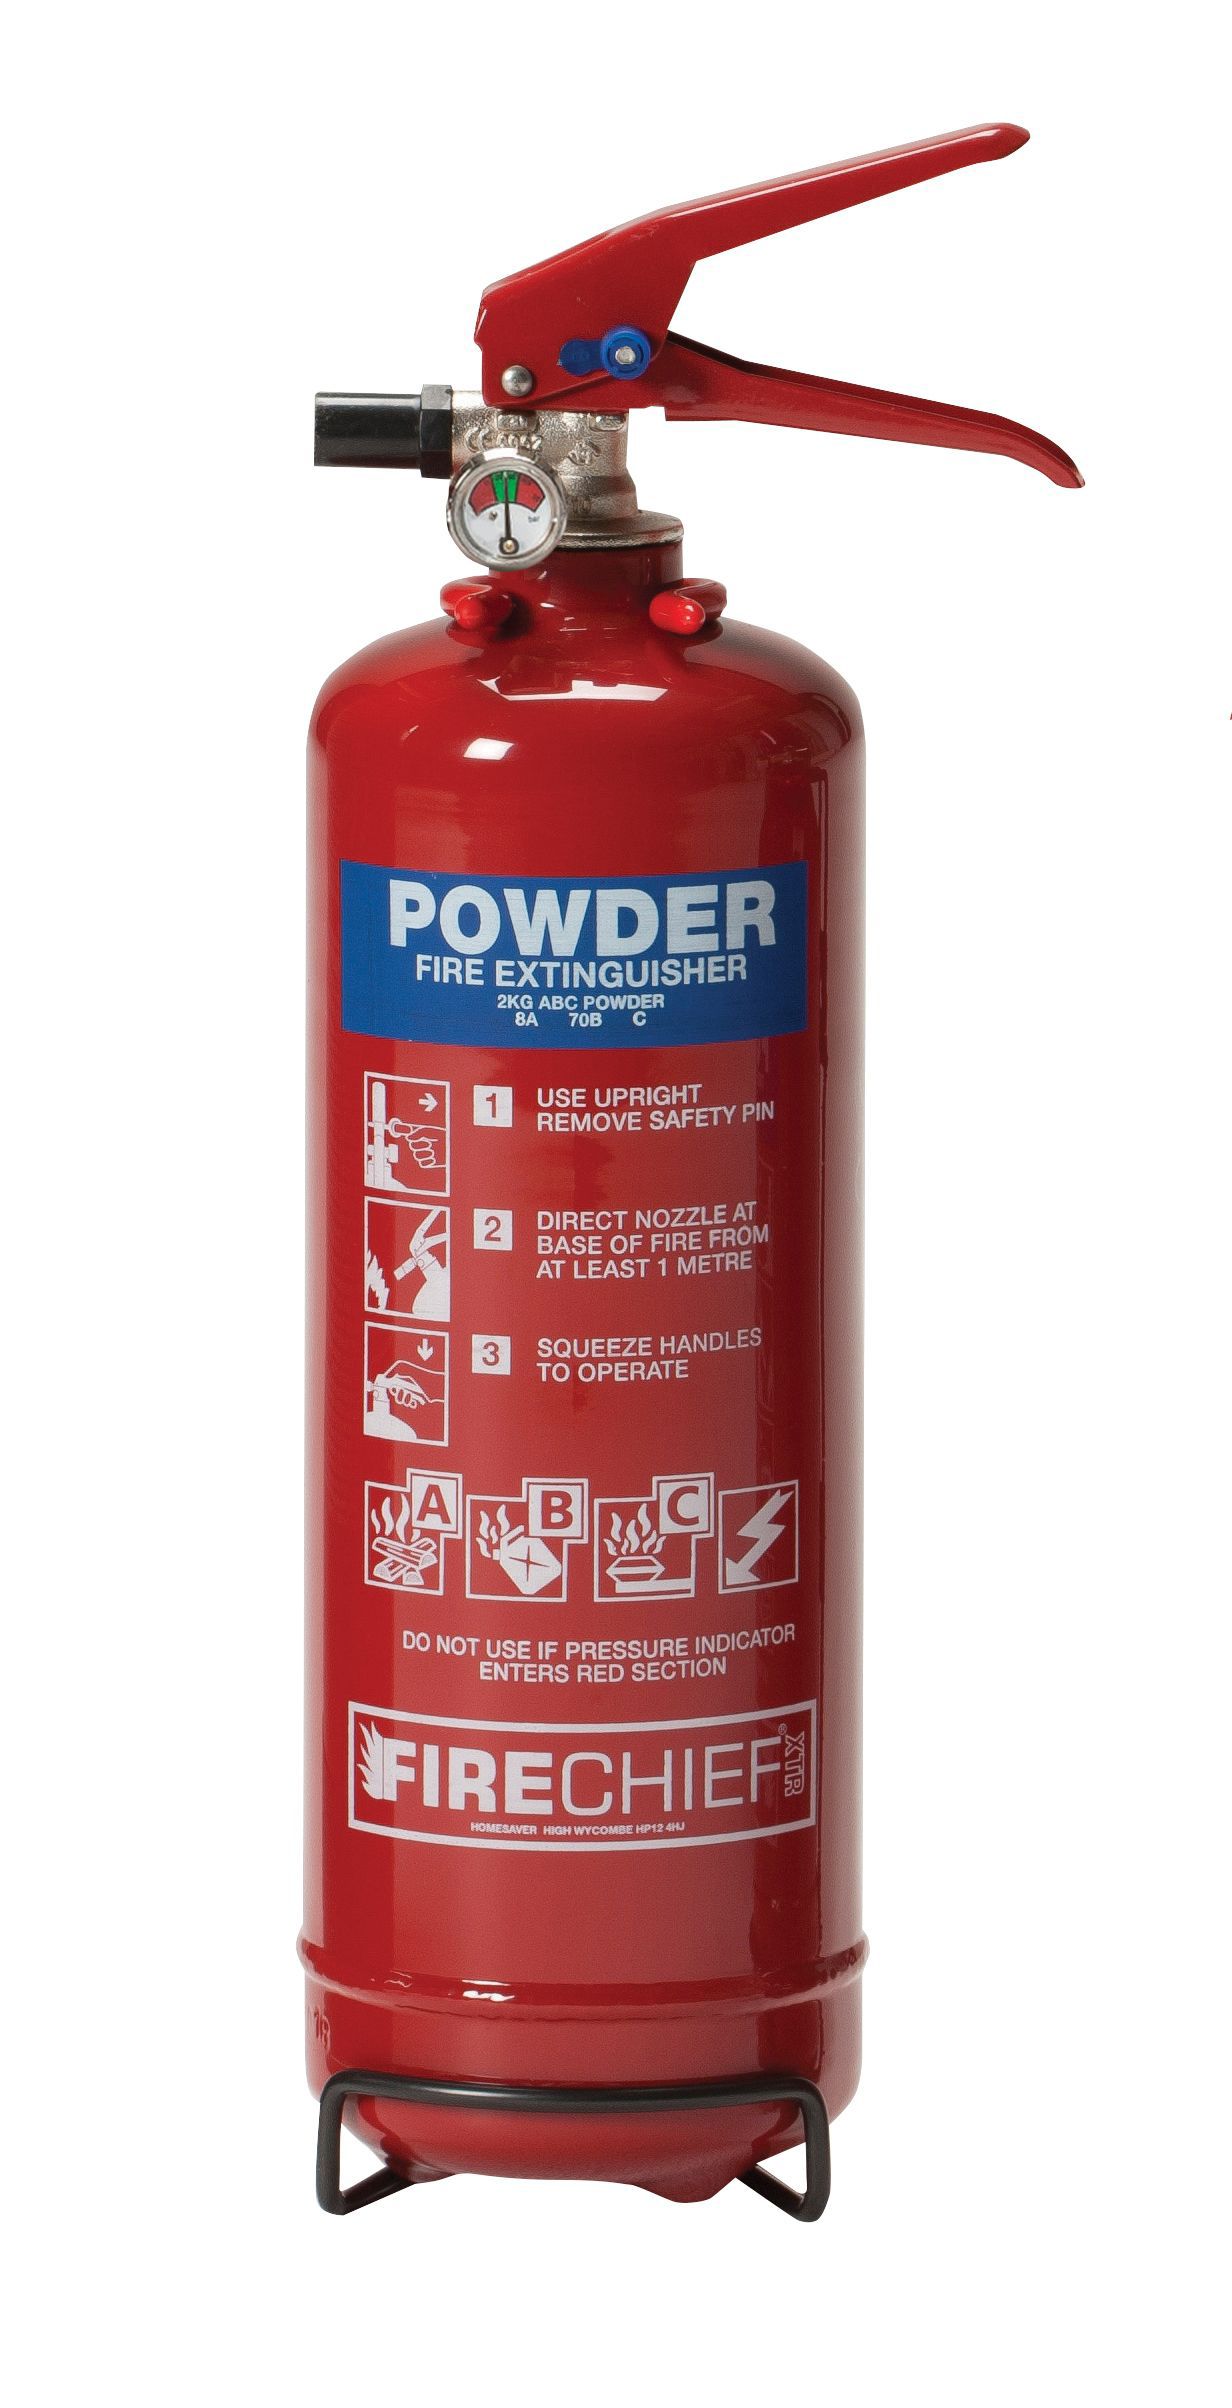 firechief-dry-powder-fire-extinguisher-departments-diy-at-b-q